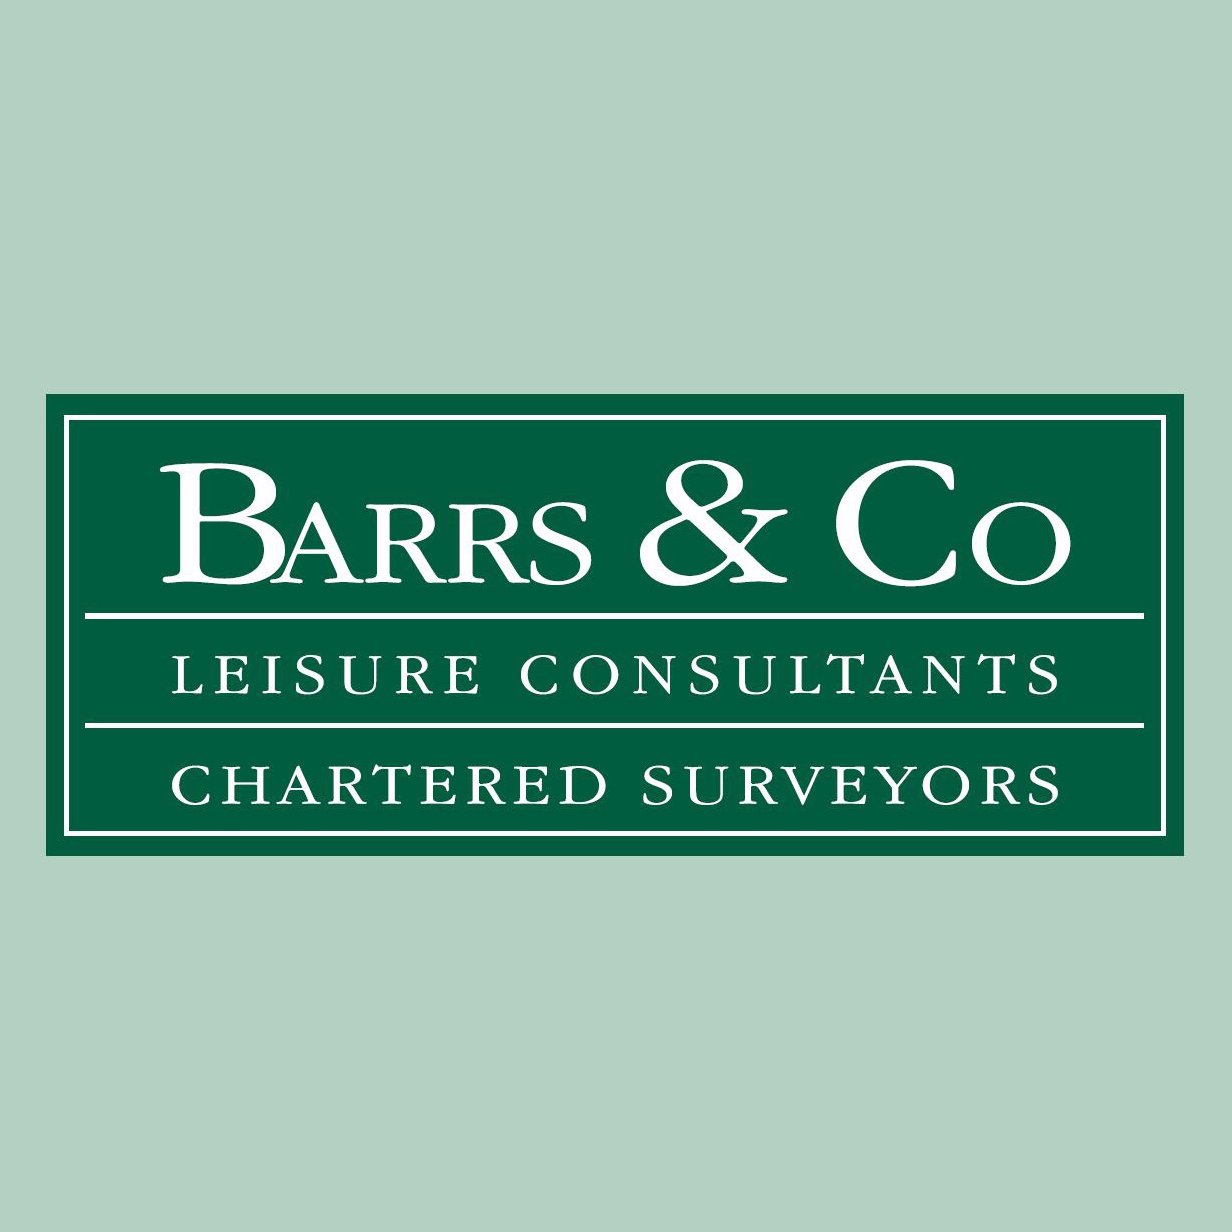 Specialist Chartered Surveyors to the caravan park and holiday property industry. Providing advice to BH&HPA and CASSOA members across all parts of the UK.